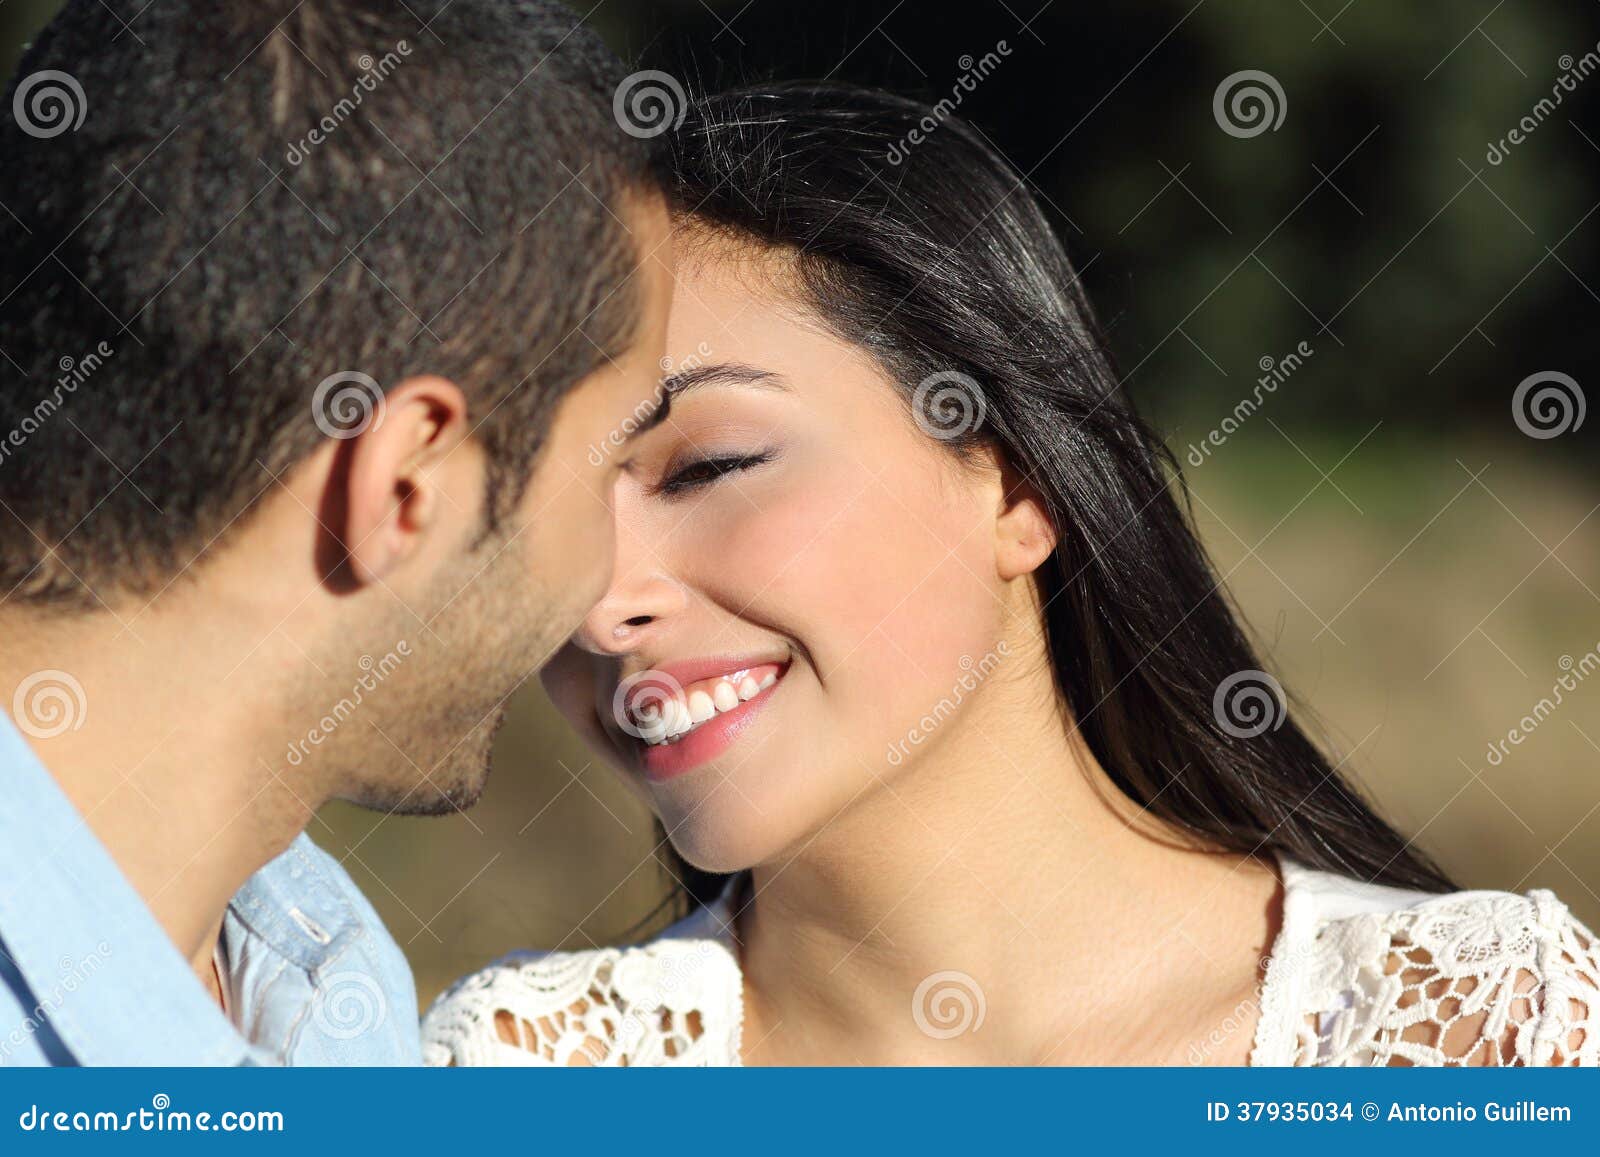 arab casual couple flirting ready to kiss with love